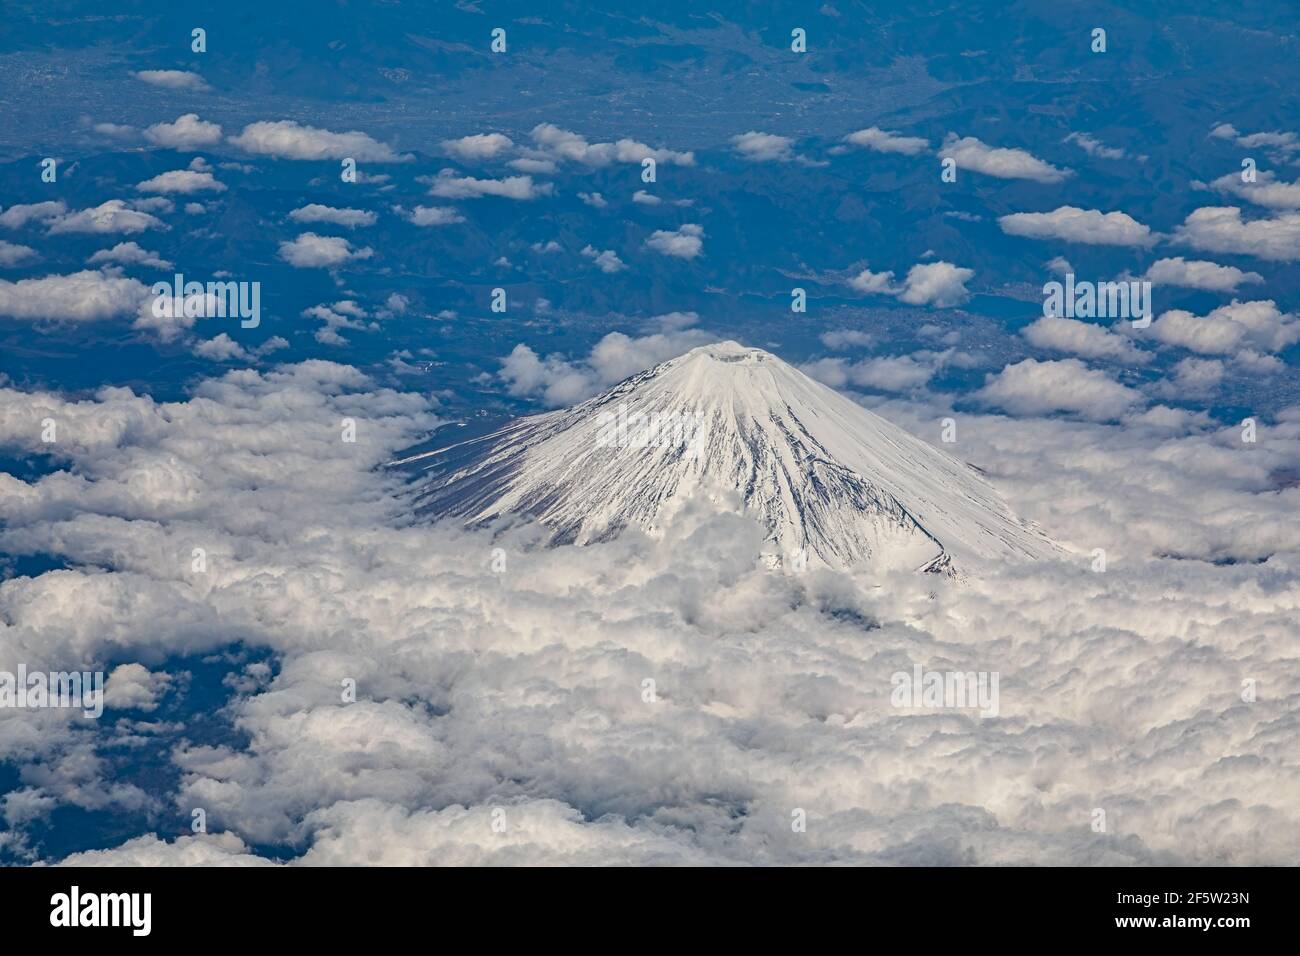 Mt. Fuji in Japan daytime aerial view from airplane Stock Photo - Alamy